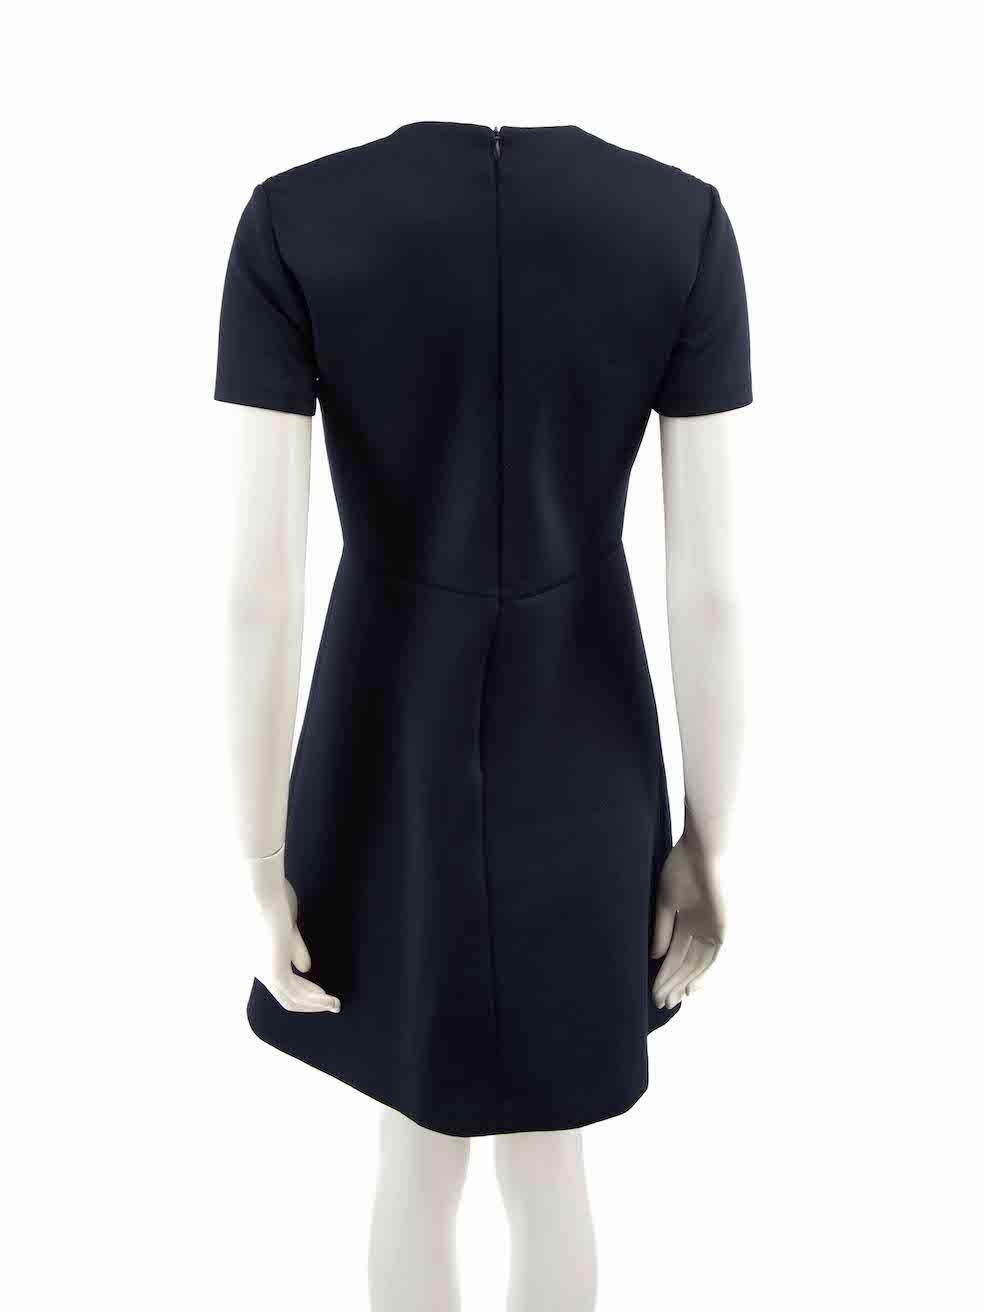 Sandro Navy Lace Pattern Detail Mini Dress Size M In Good Condition For Sale In London, GB